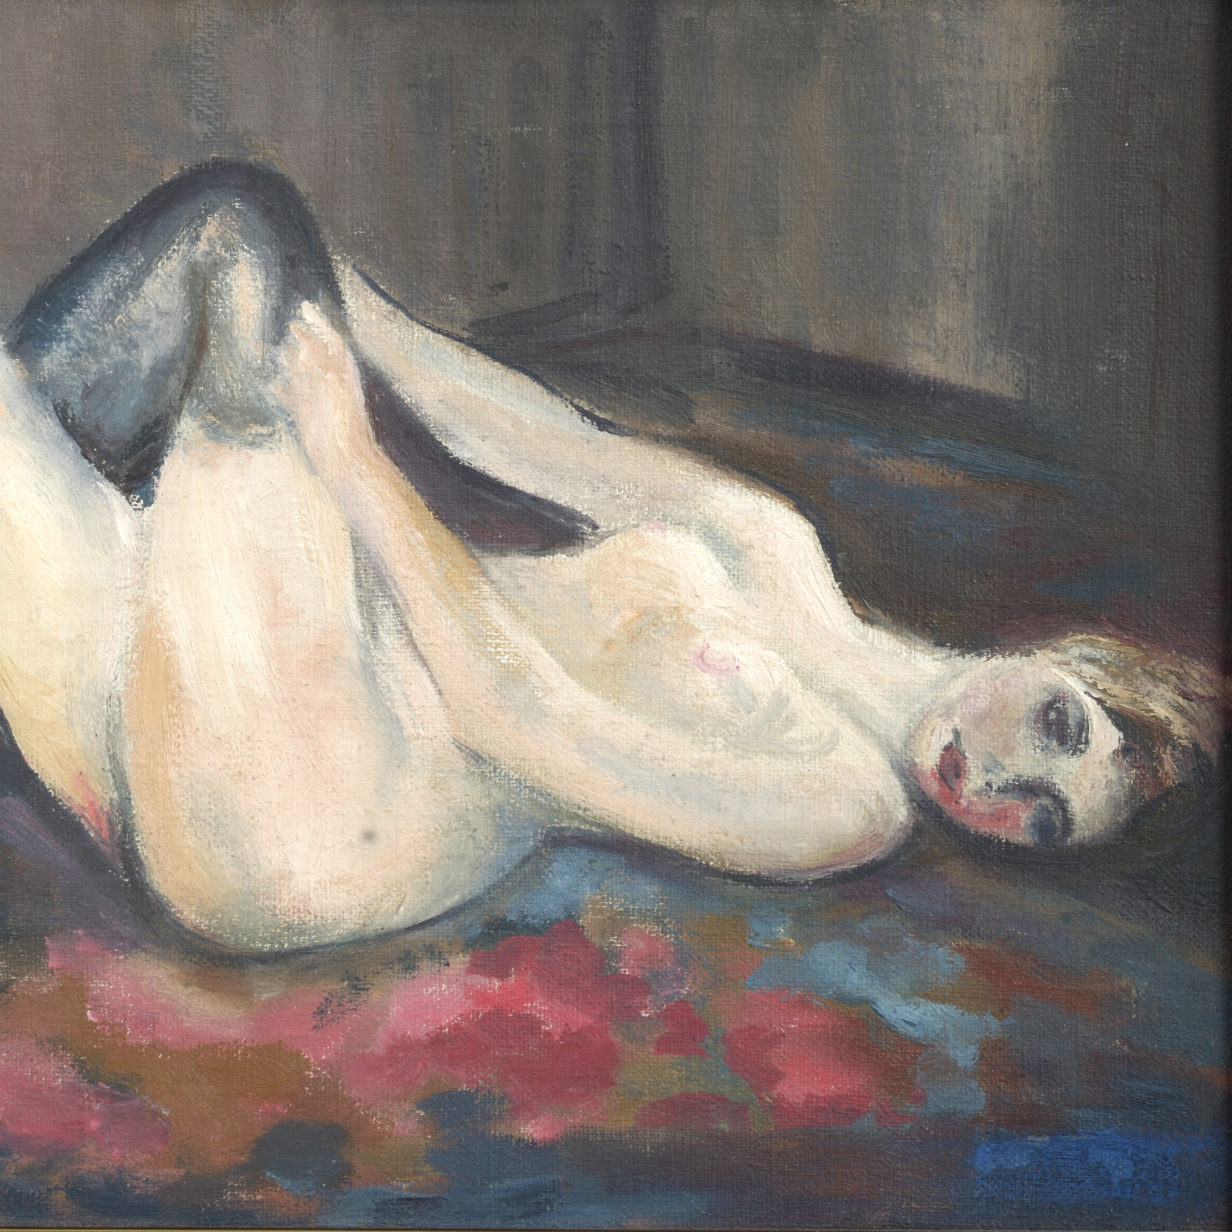 20th century study of a nude female